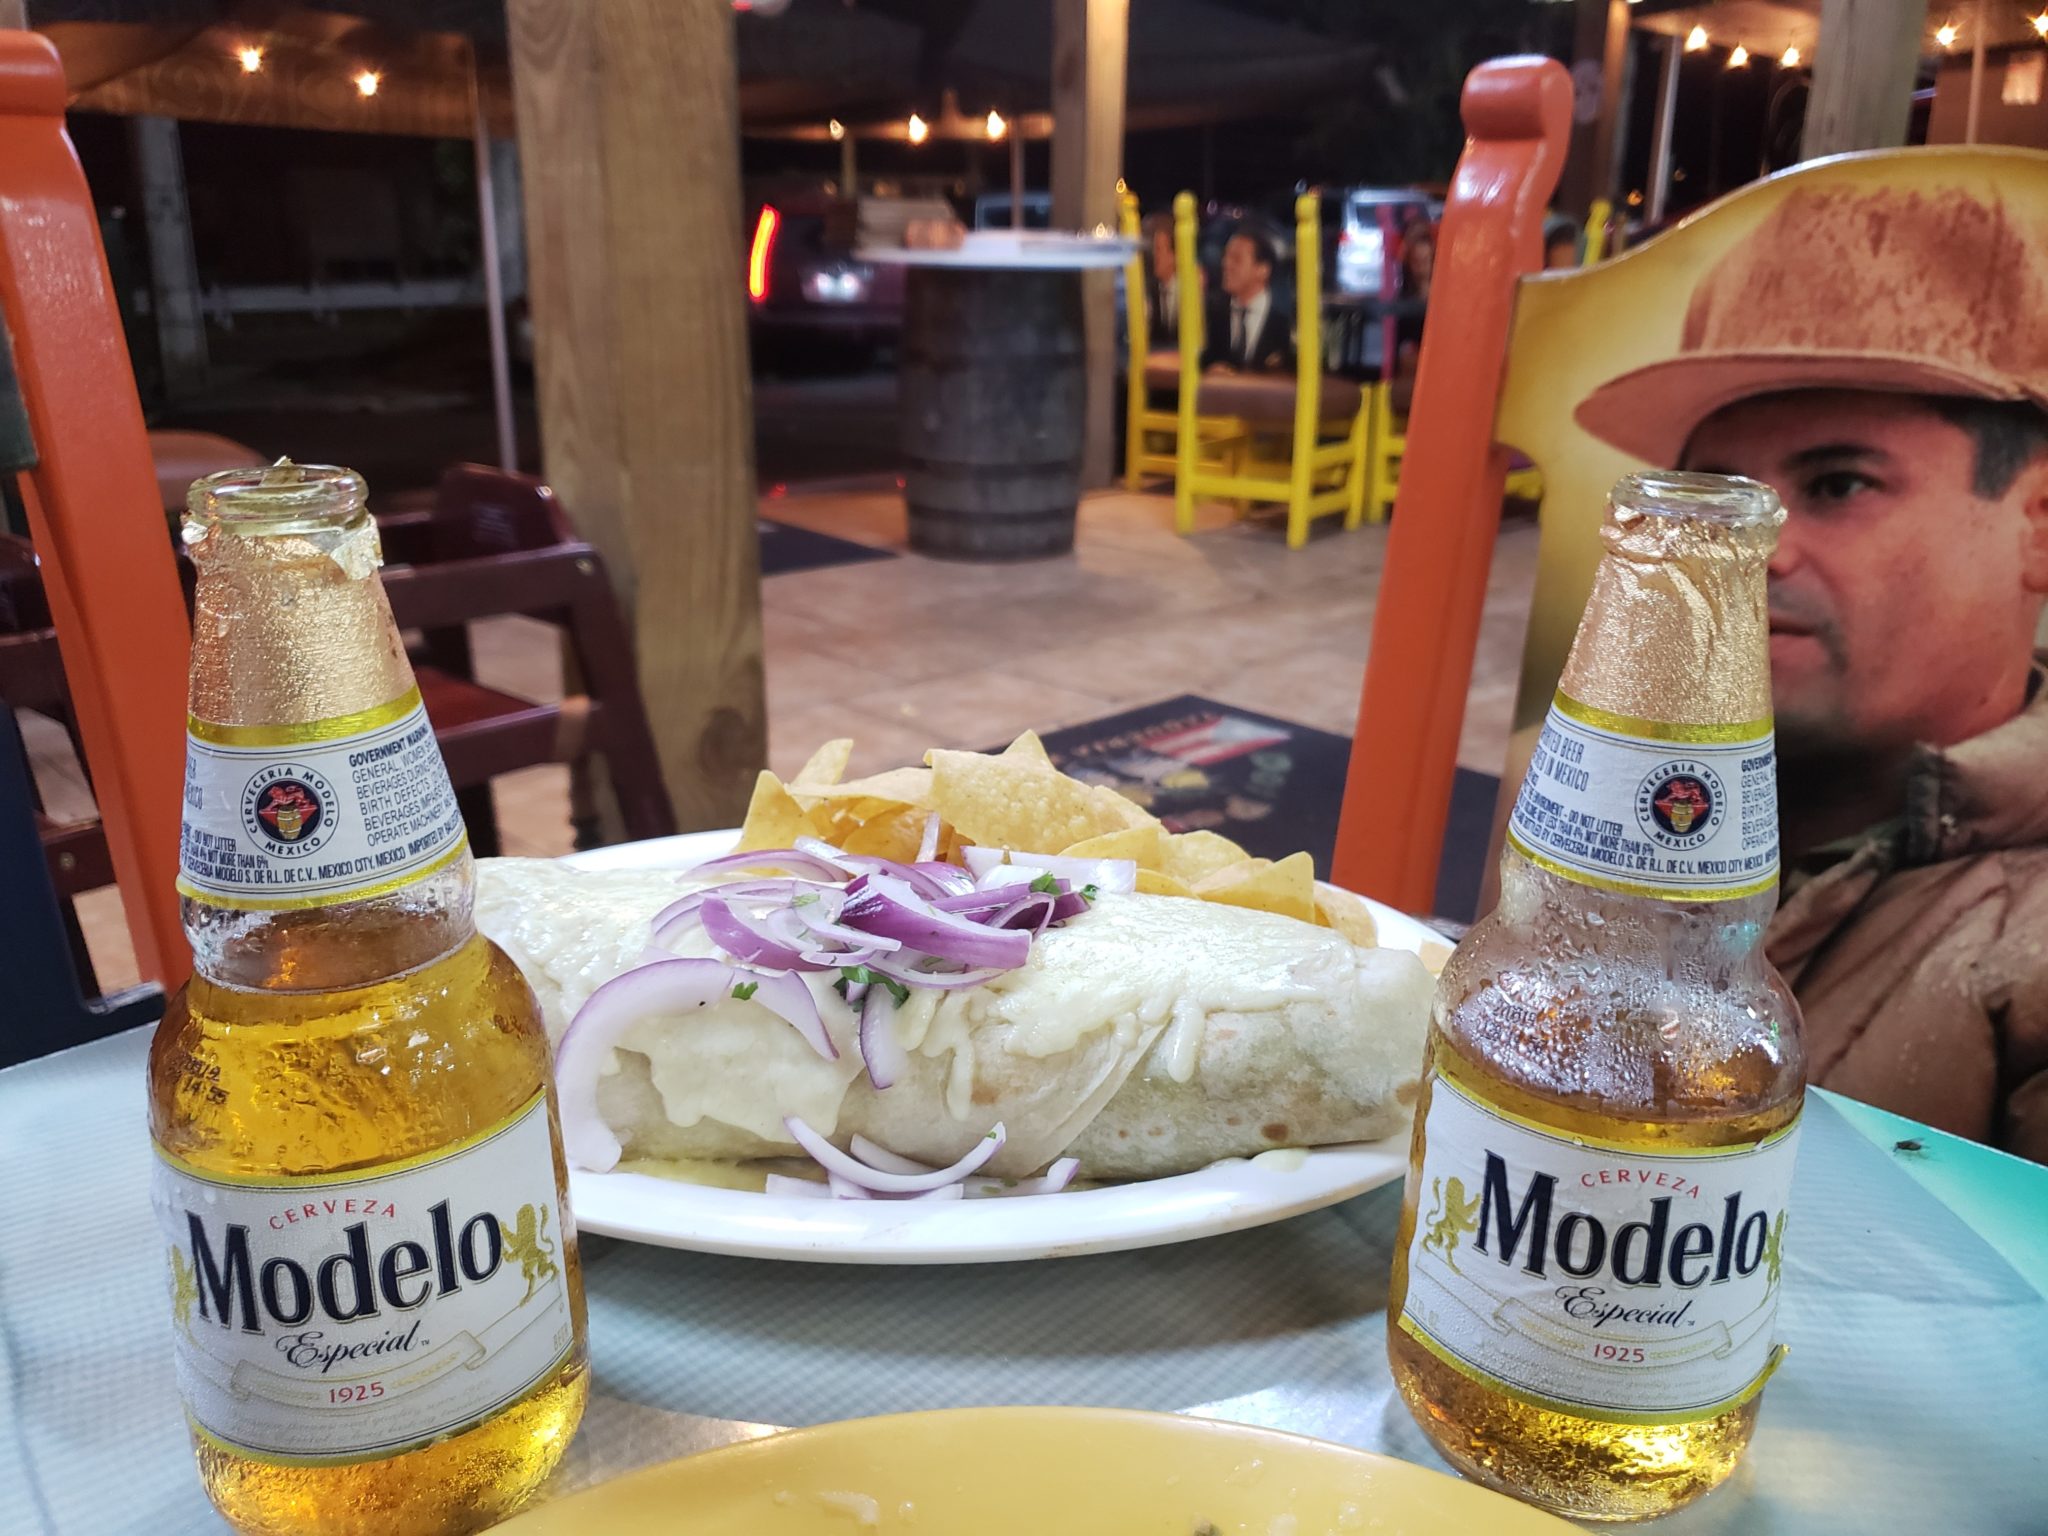 a burrito and beer bottles on a table